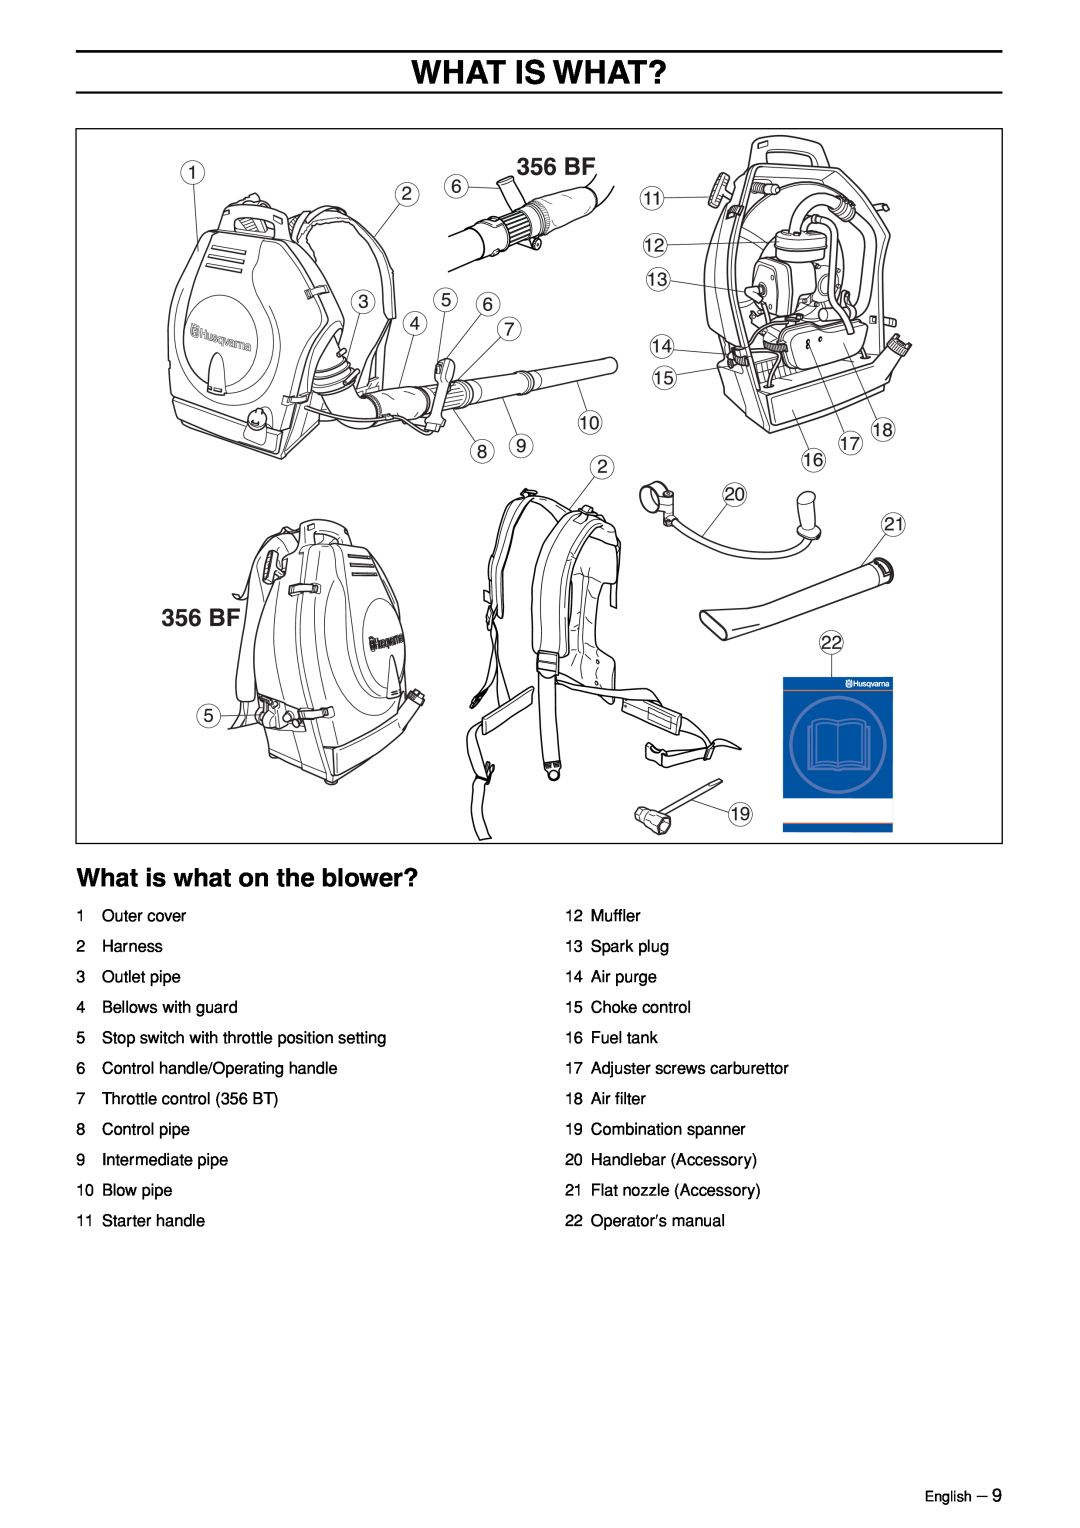 Husqvarna 356BT manual What Is What?, What is what on the blower? 